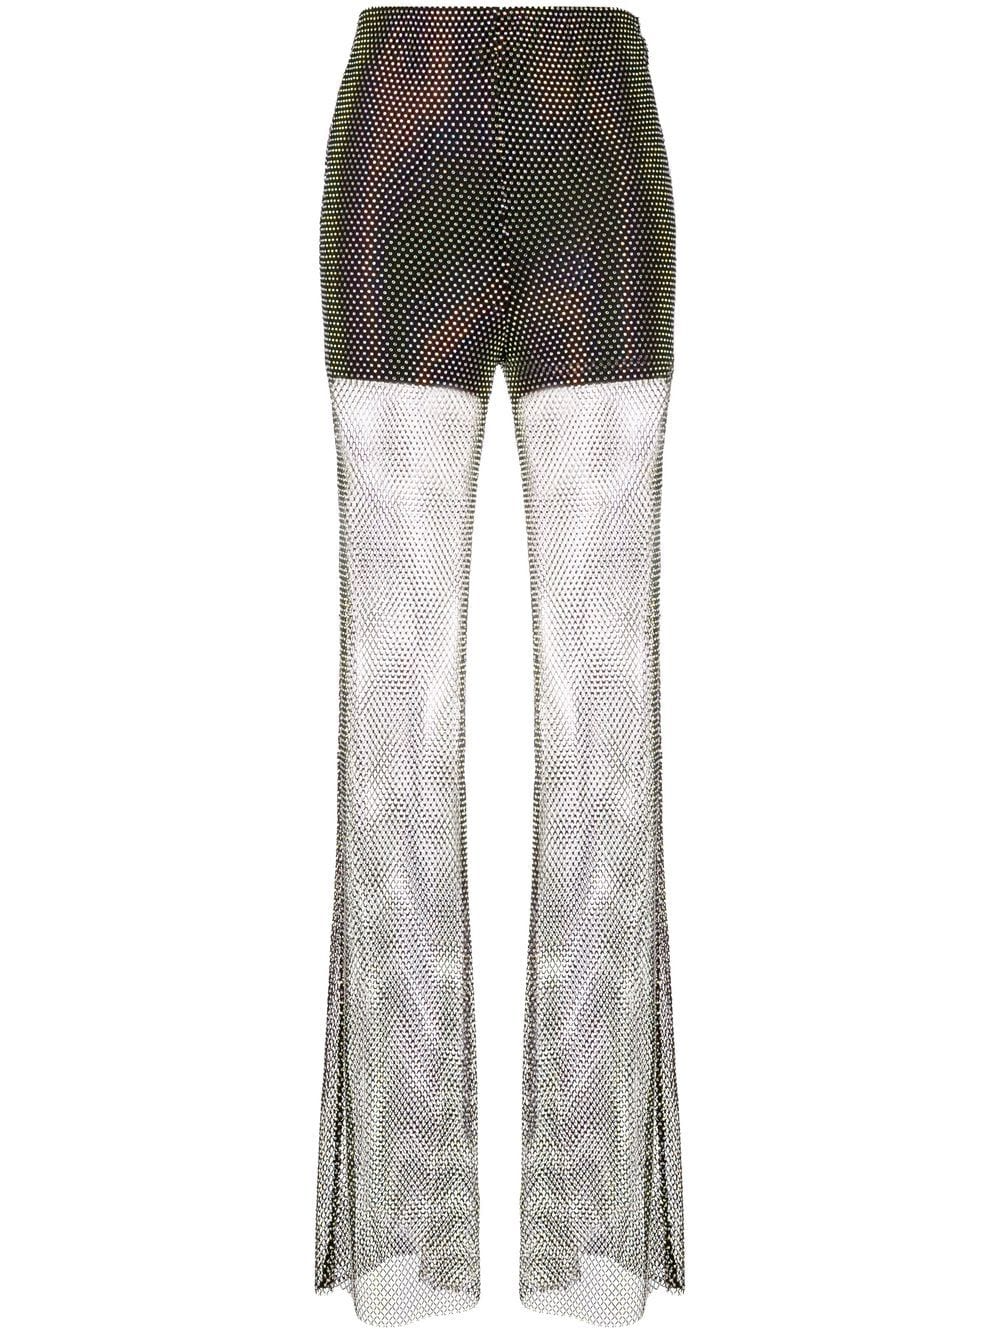 Rotate + crystal-embellished sheer trousers